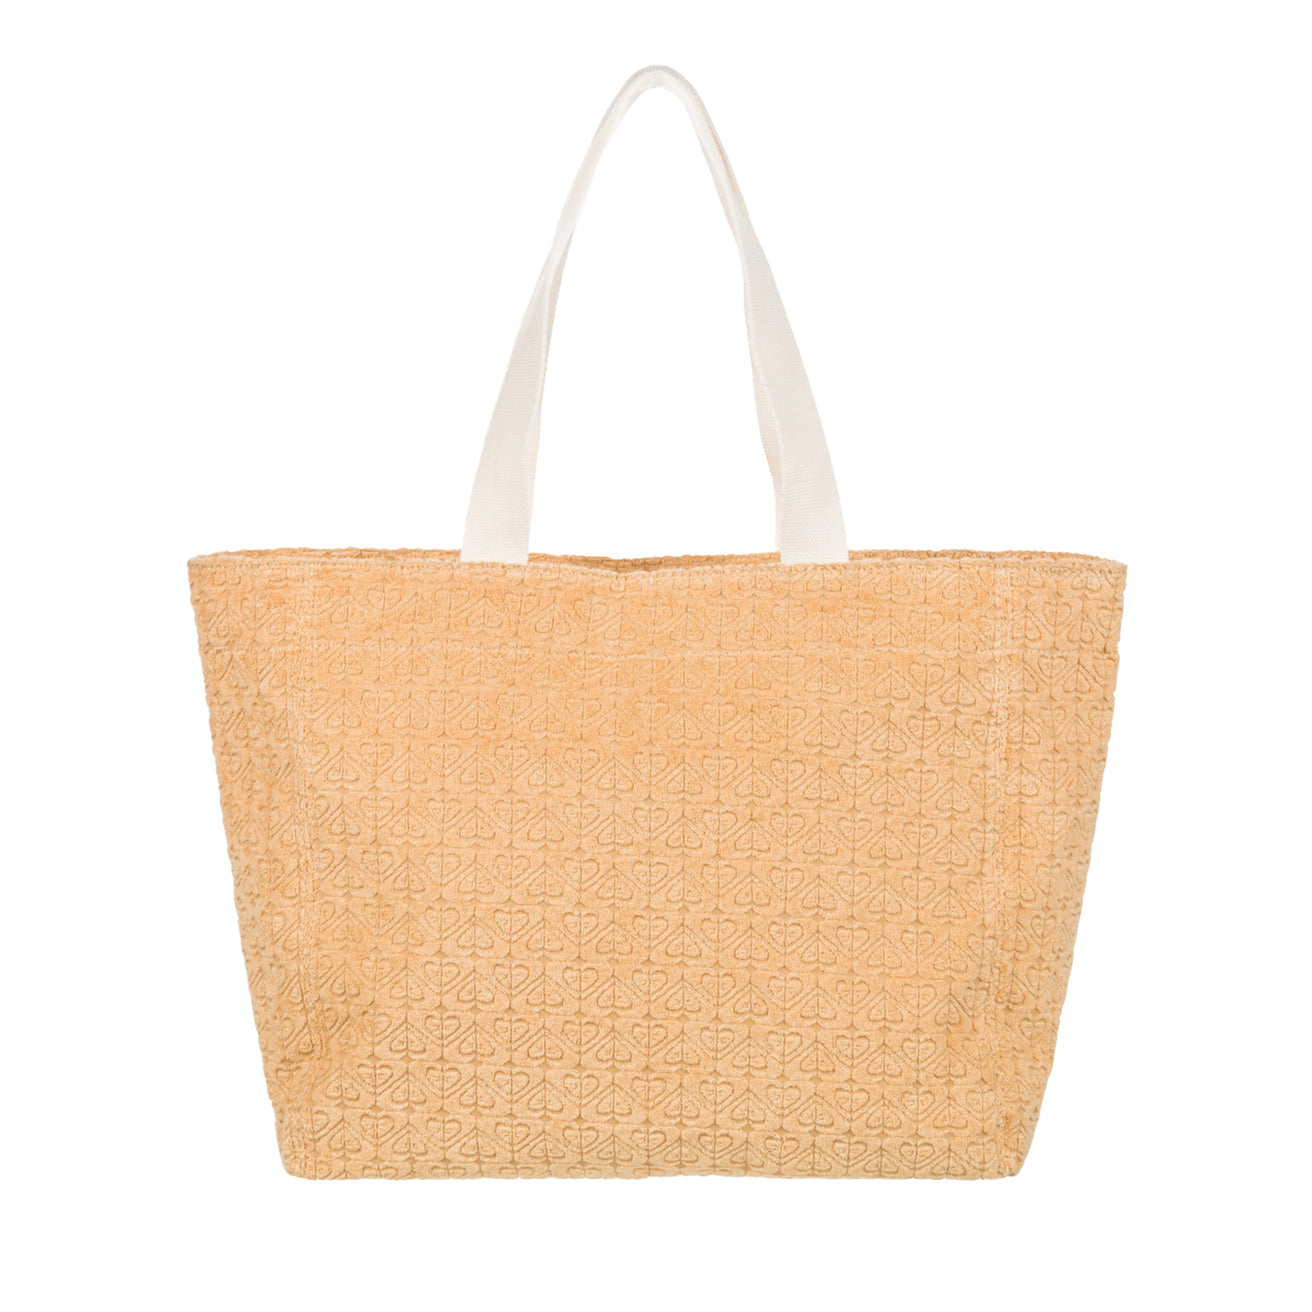 Roxy | Tequila Party Tote Bag